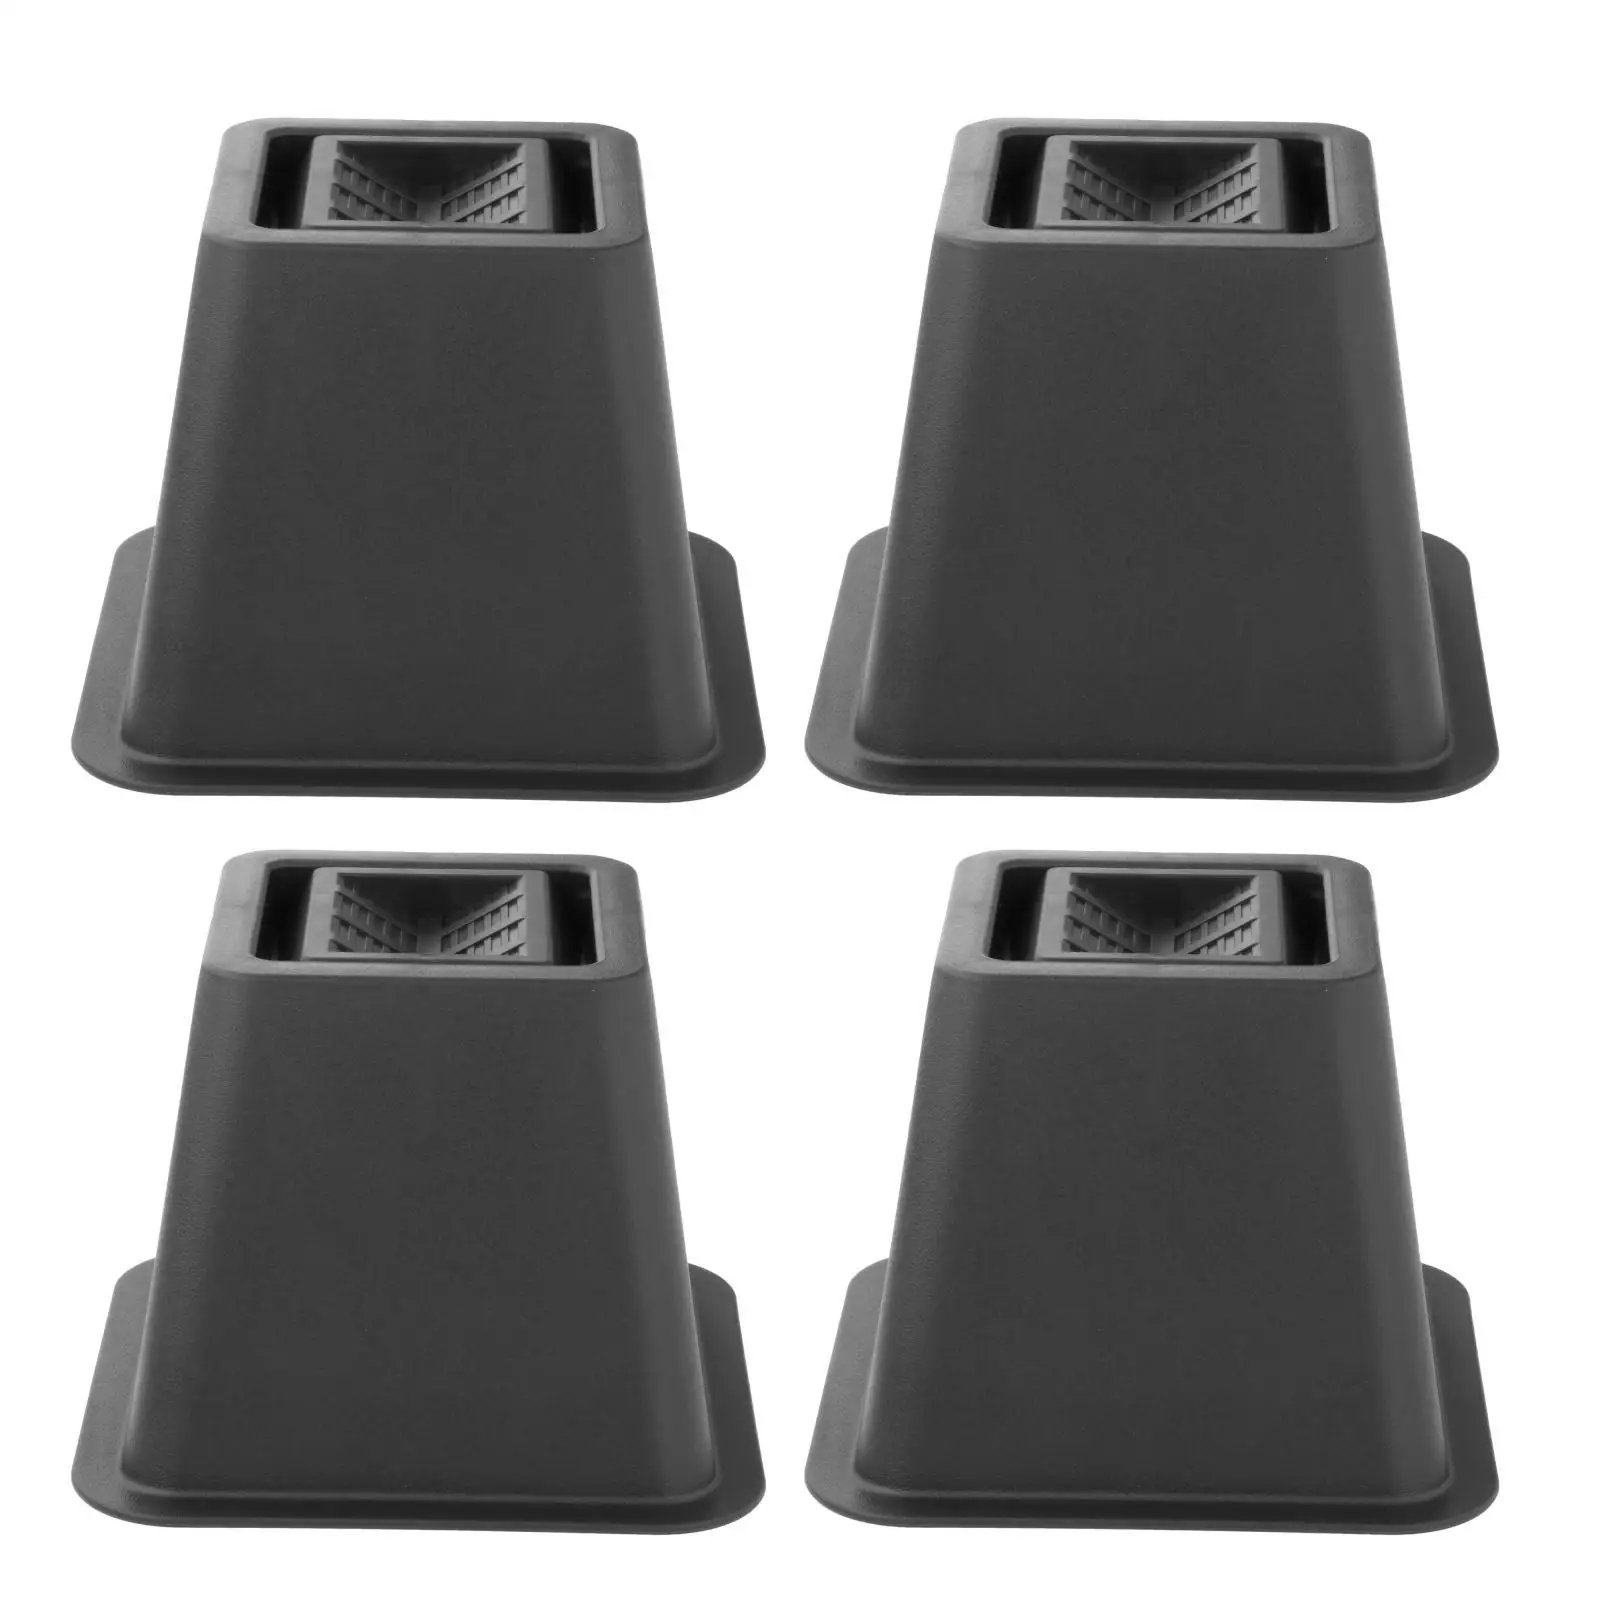 4 Pieces Heavy Duty Furniture Bed Risers Free Moving Bed Elevators Non Skid Floor Protector for Sofa and Table Support